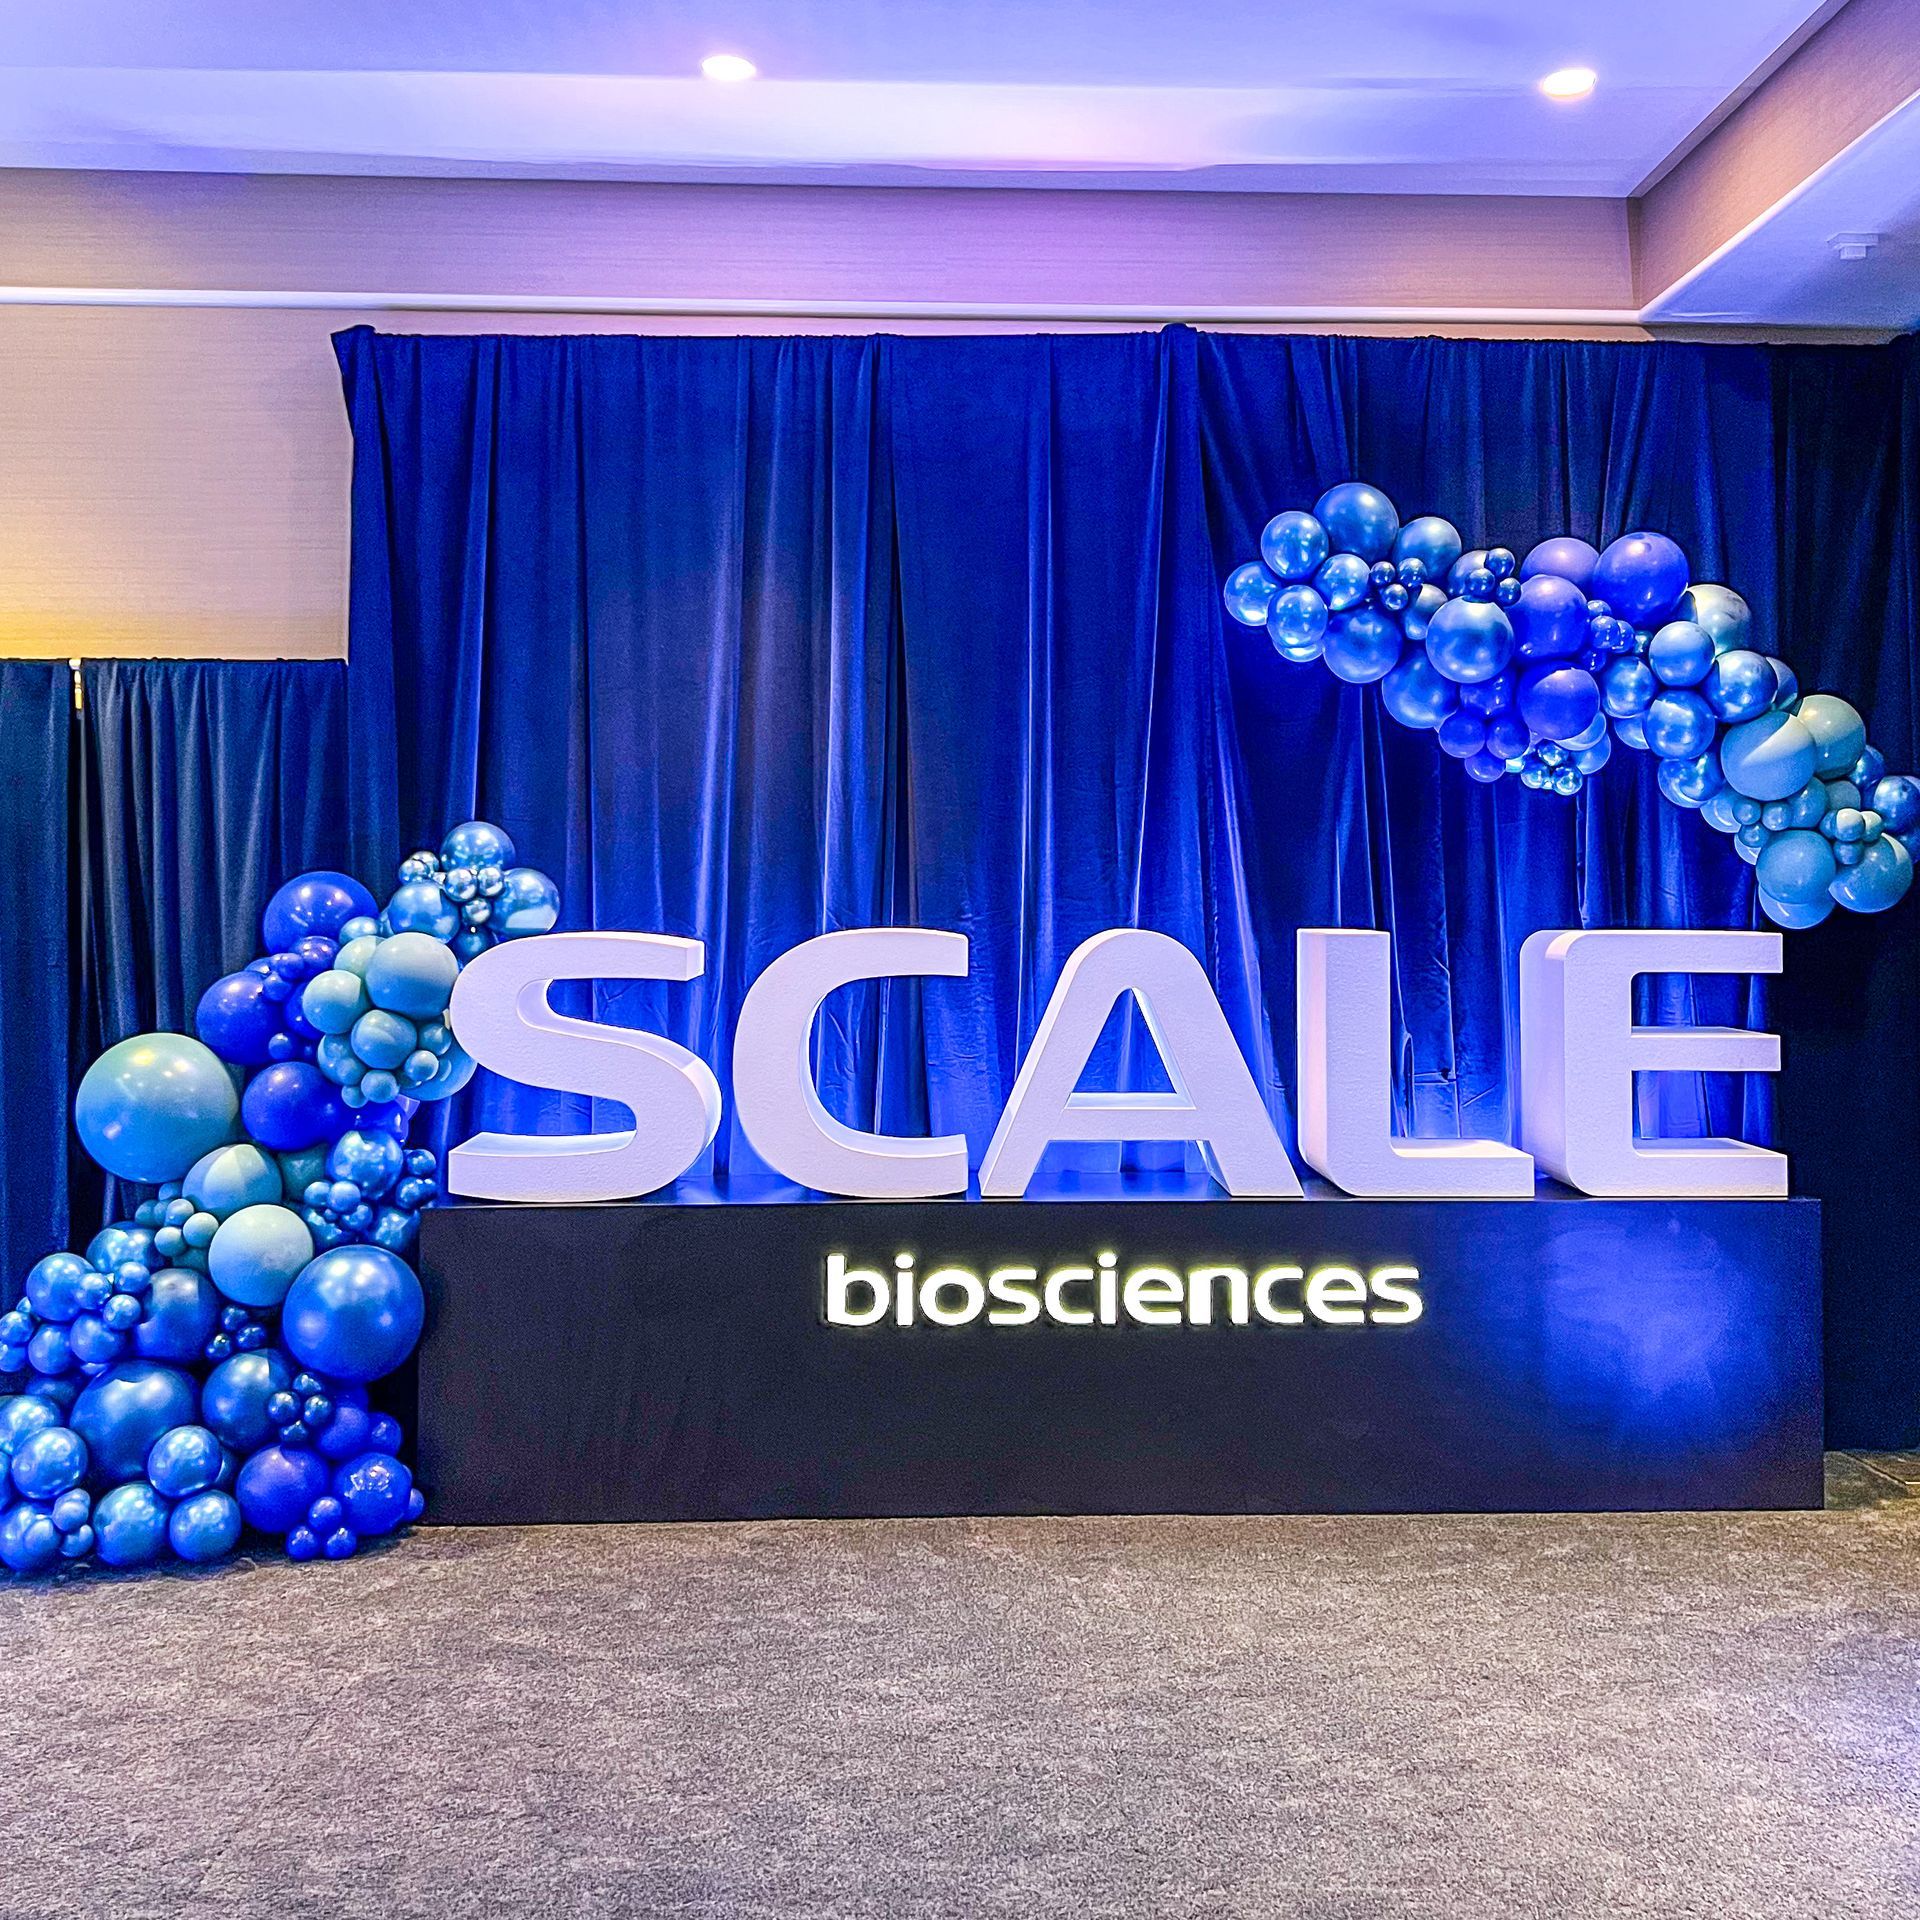 A sign that says scale biosciences is surrounded by blue balloons